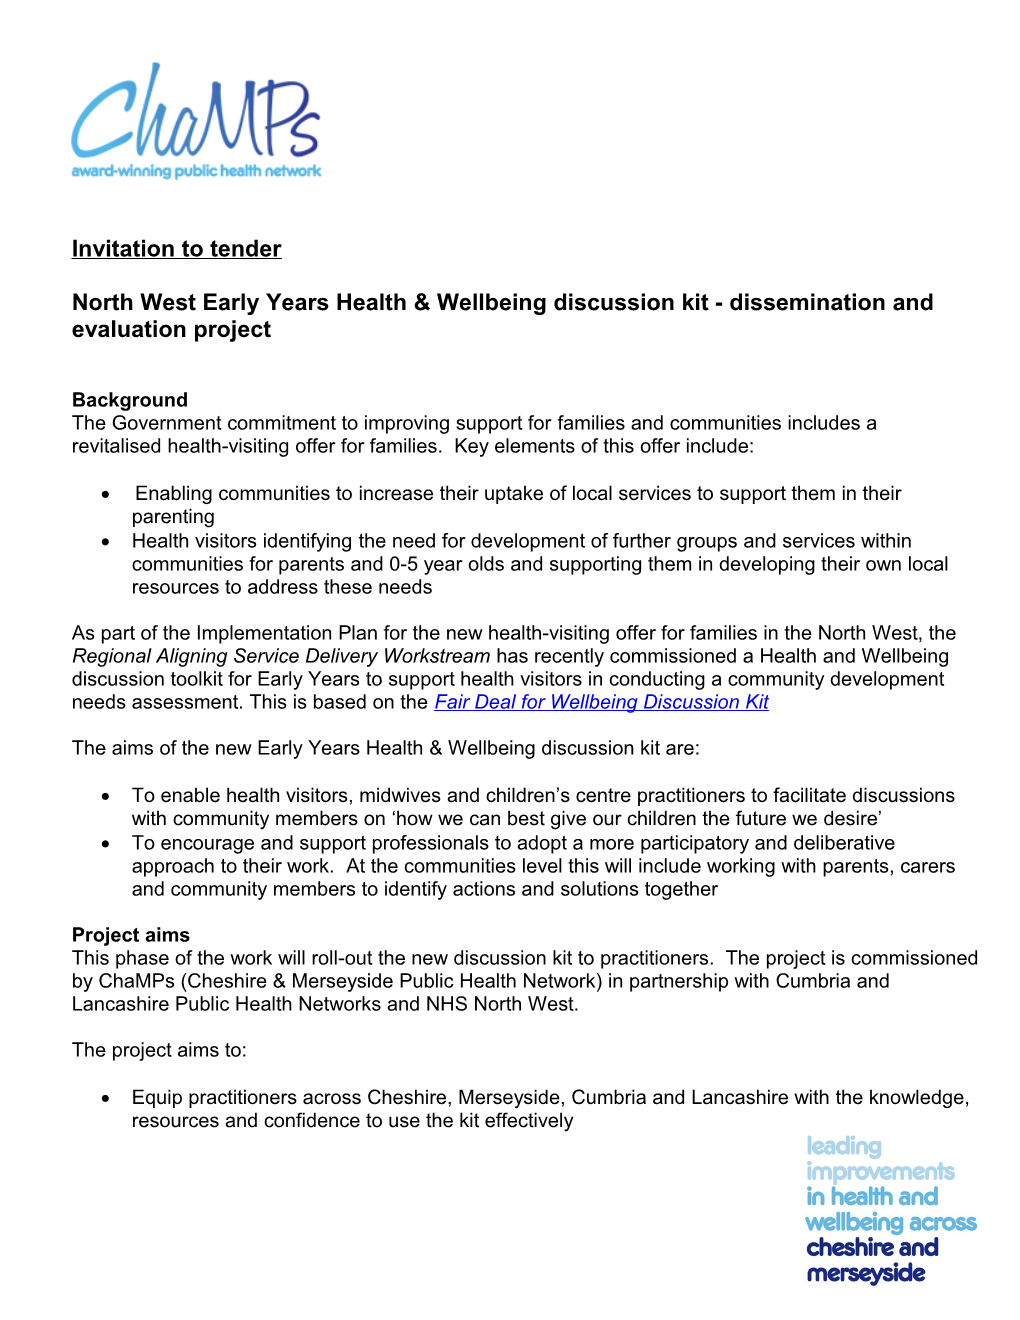 Roll-Out and Evaluation of the NW Early Years Health & Wellbeing Discussion Kit